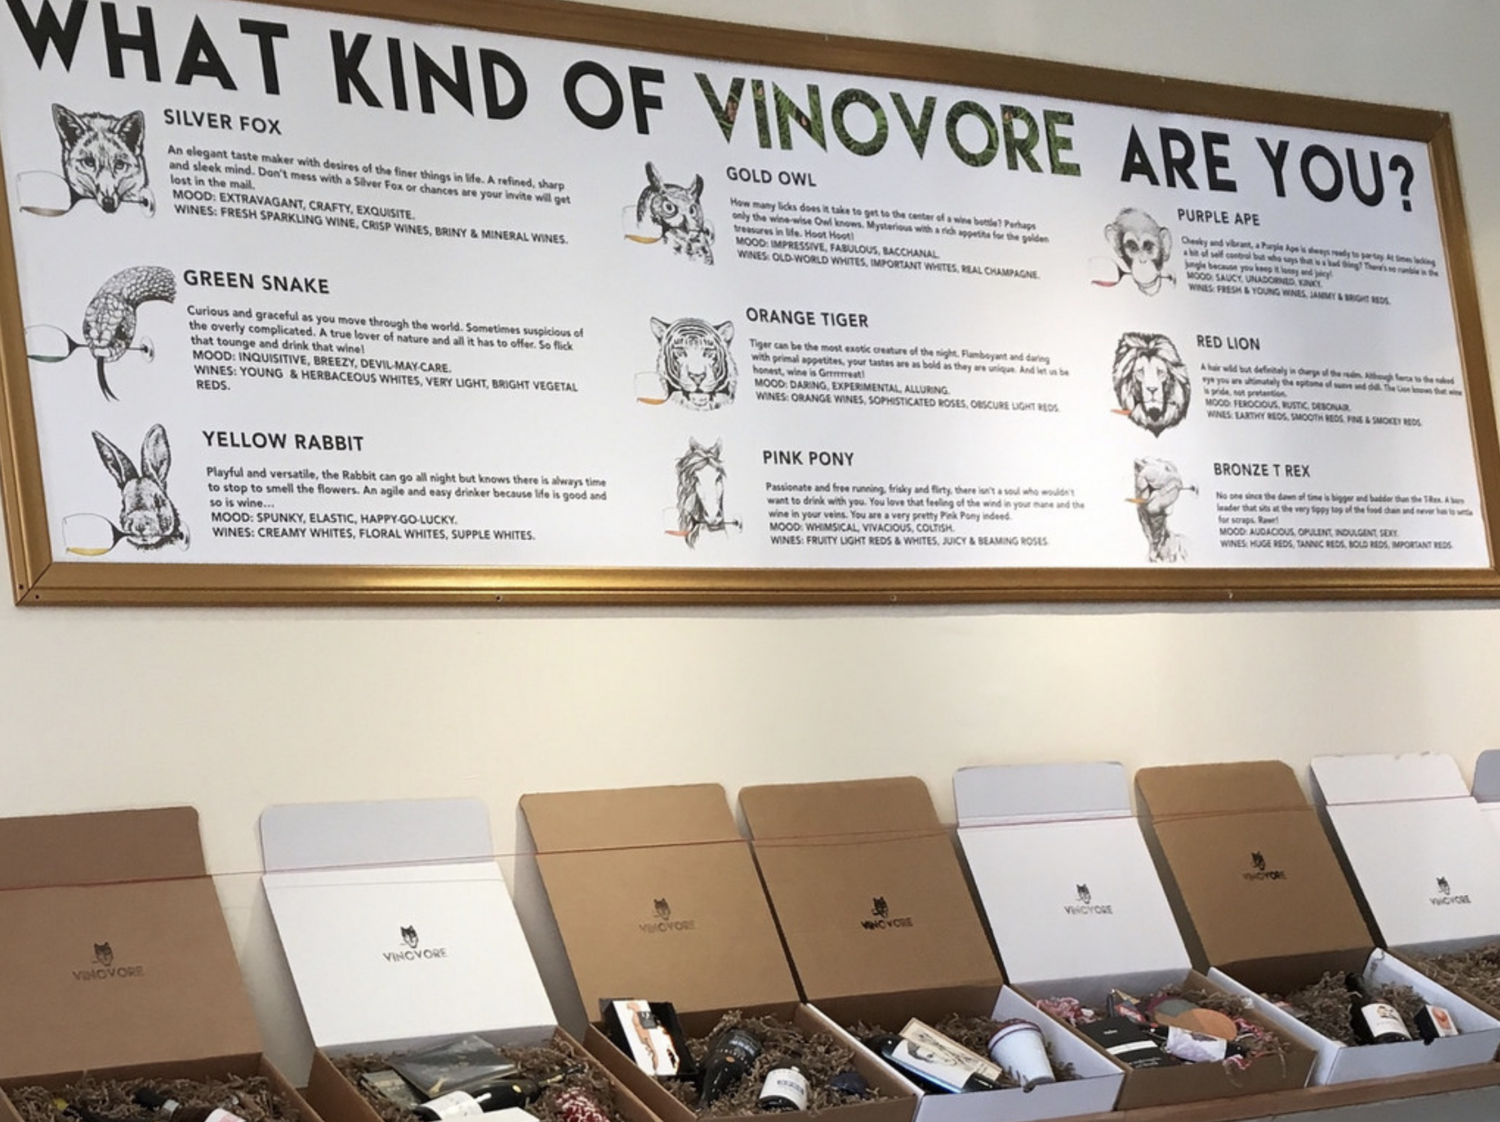 Wine chart showing some wine animals and tasting notes above pre-made wine gift boxes on a shelf